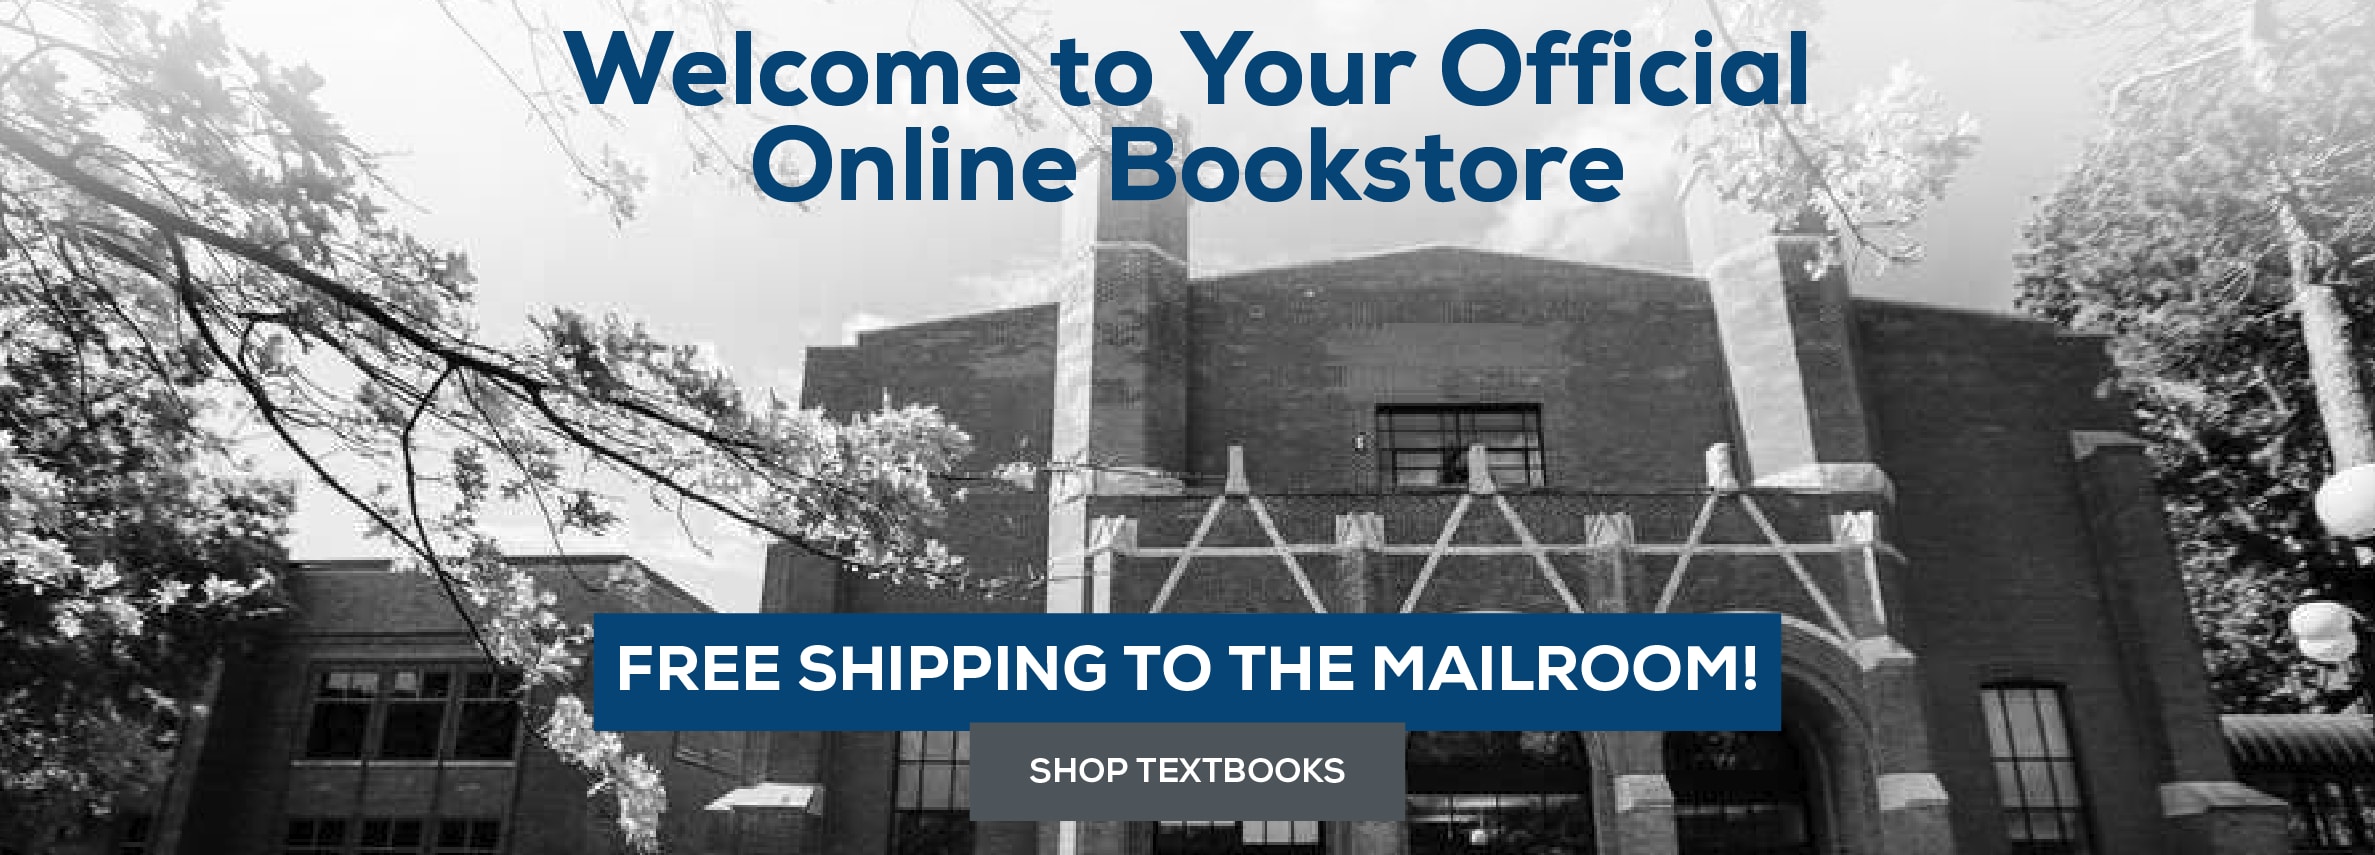 Welcome to Your Official Online Bookstore! Free shipping to the Mailroom! Shop Textbooks